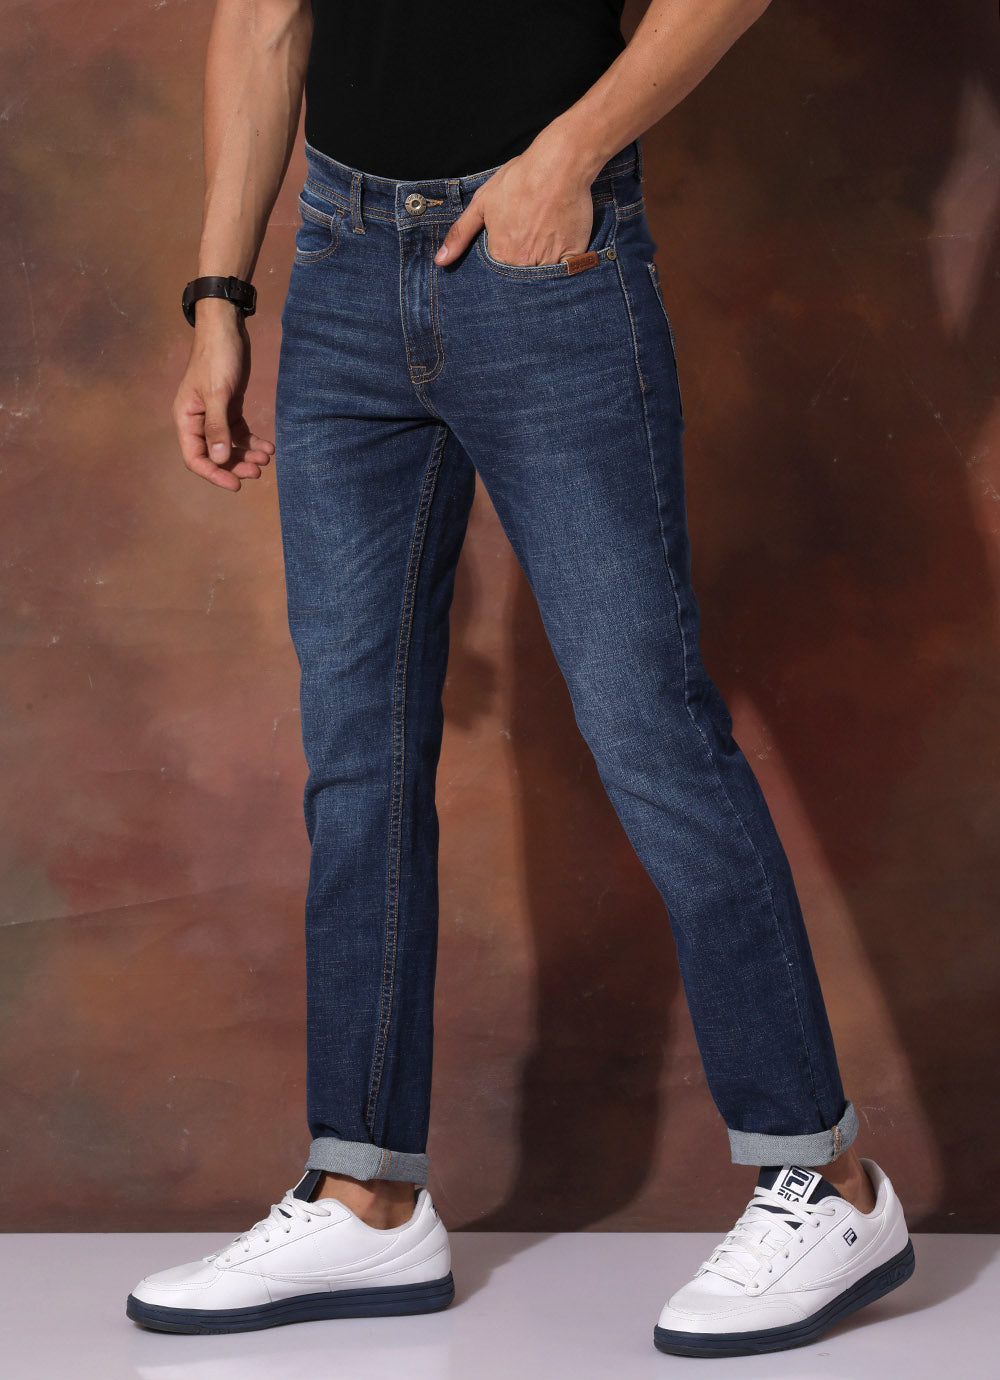 Blue Haze (Slim Fit Jeans ,Featuring Regular Pockets, Crafted From Twill Fabric.)